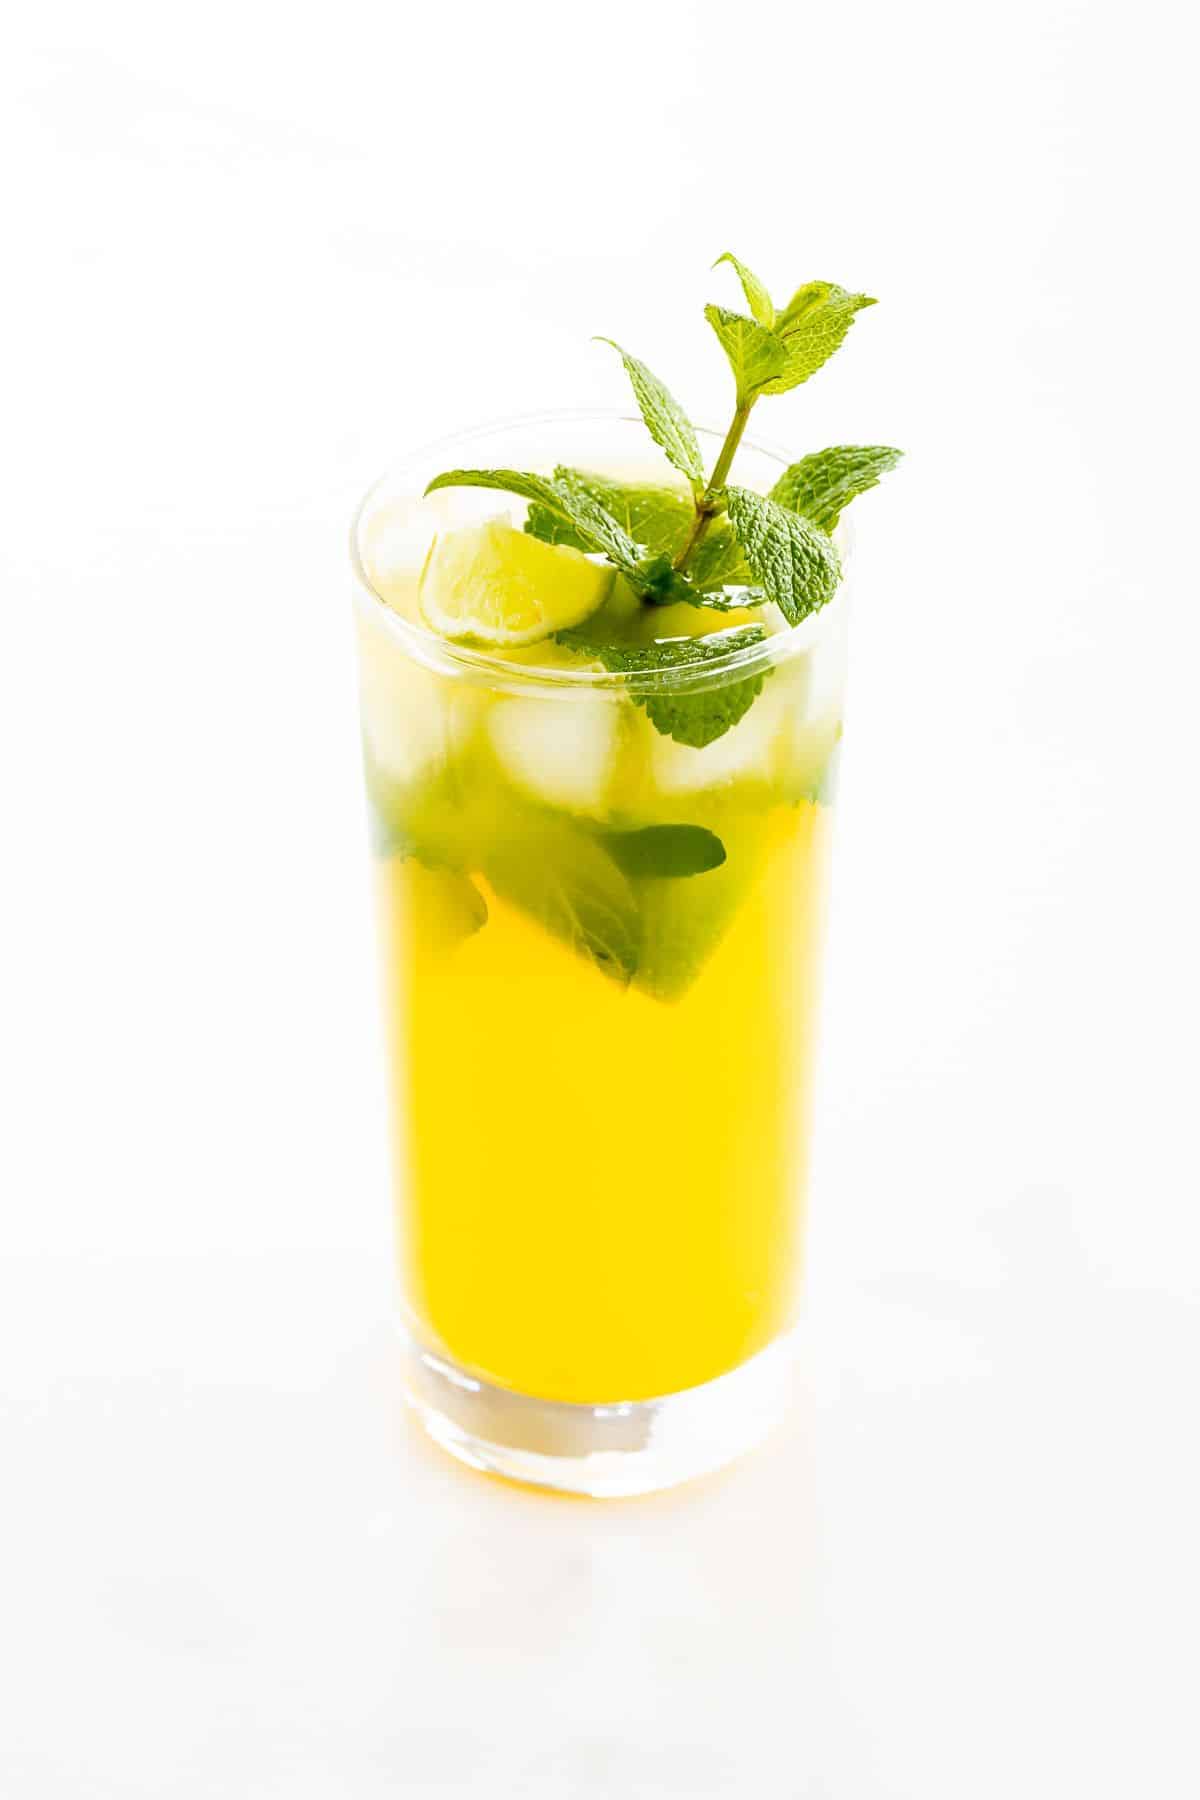 A mango mojito in a clear glass, garnished with a sprig of mint.